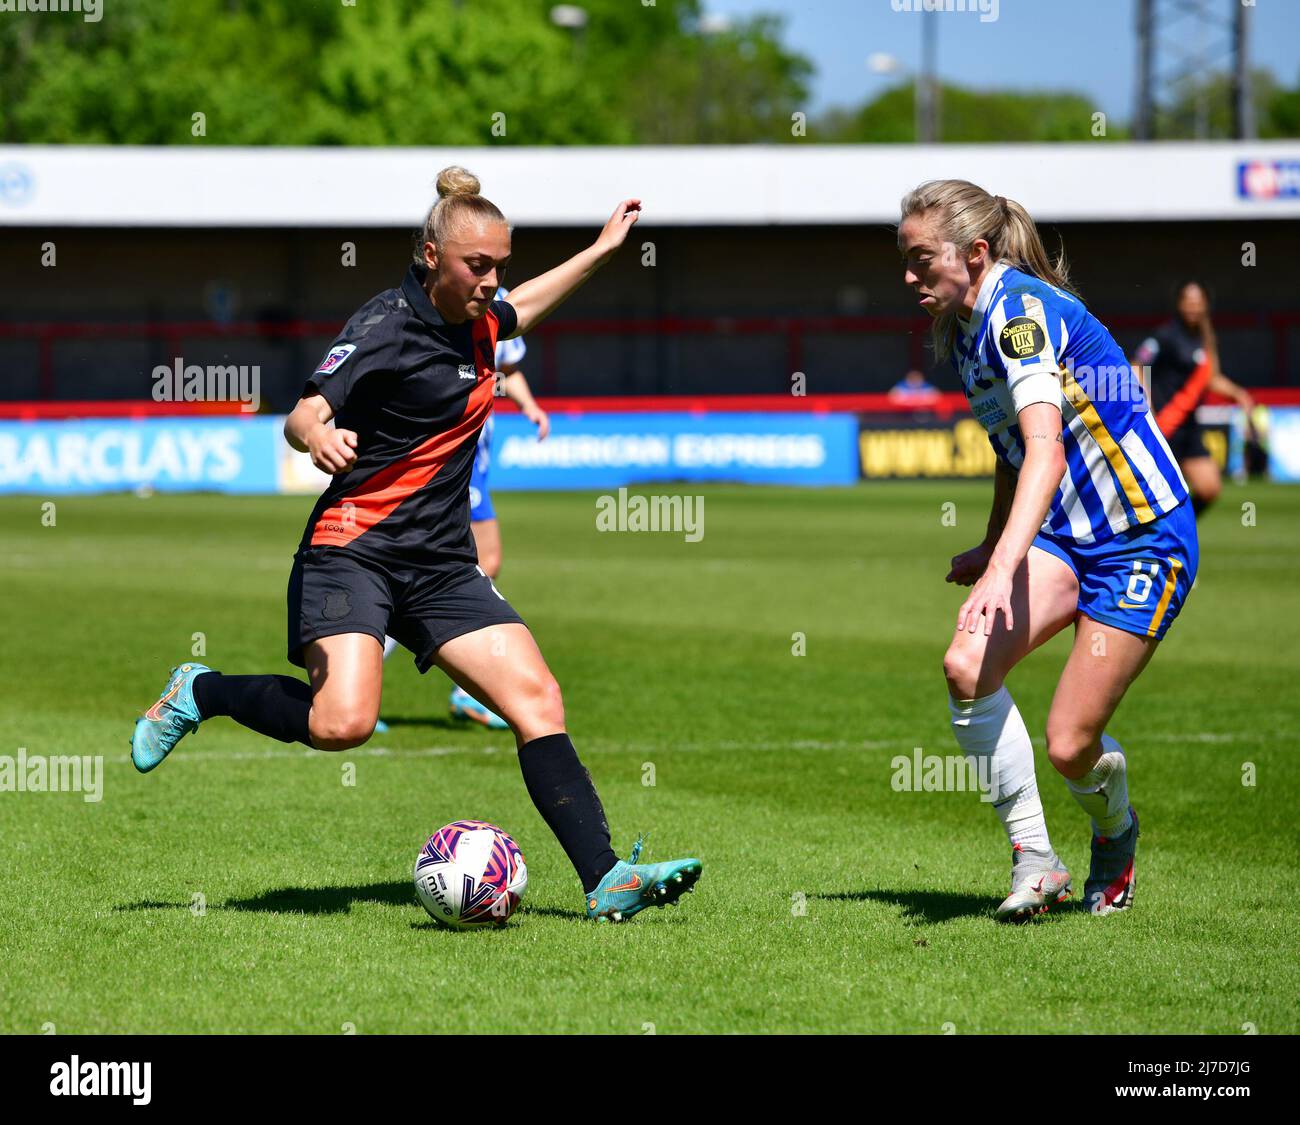 Crawley, United Kingdom, May 8th 2022,  Hanna Bennison of Everton and Megan Connolly of Brighton and Hove Albion during the FA Women's Super League match between Brighton & Hove Albion Women and Everton at The People's Pension Stadium on May 8th 2022 in Crawley, United Kingdom. (Photo by Jeff Mood/phcimages.com) Stock Photo